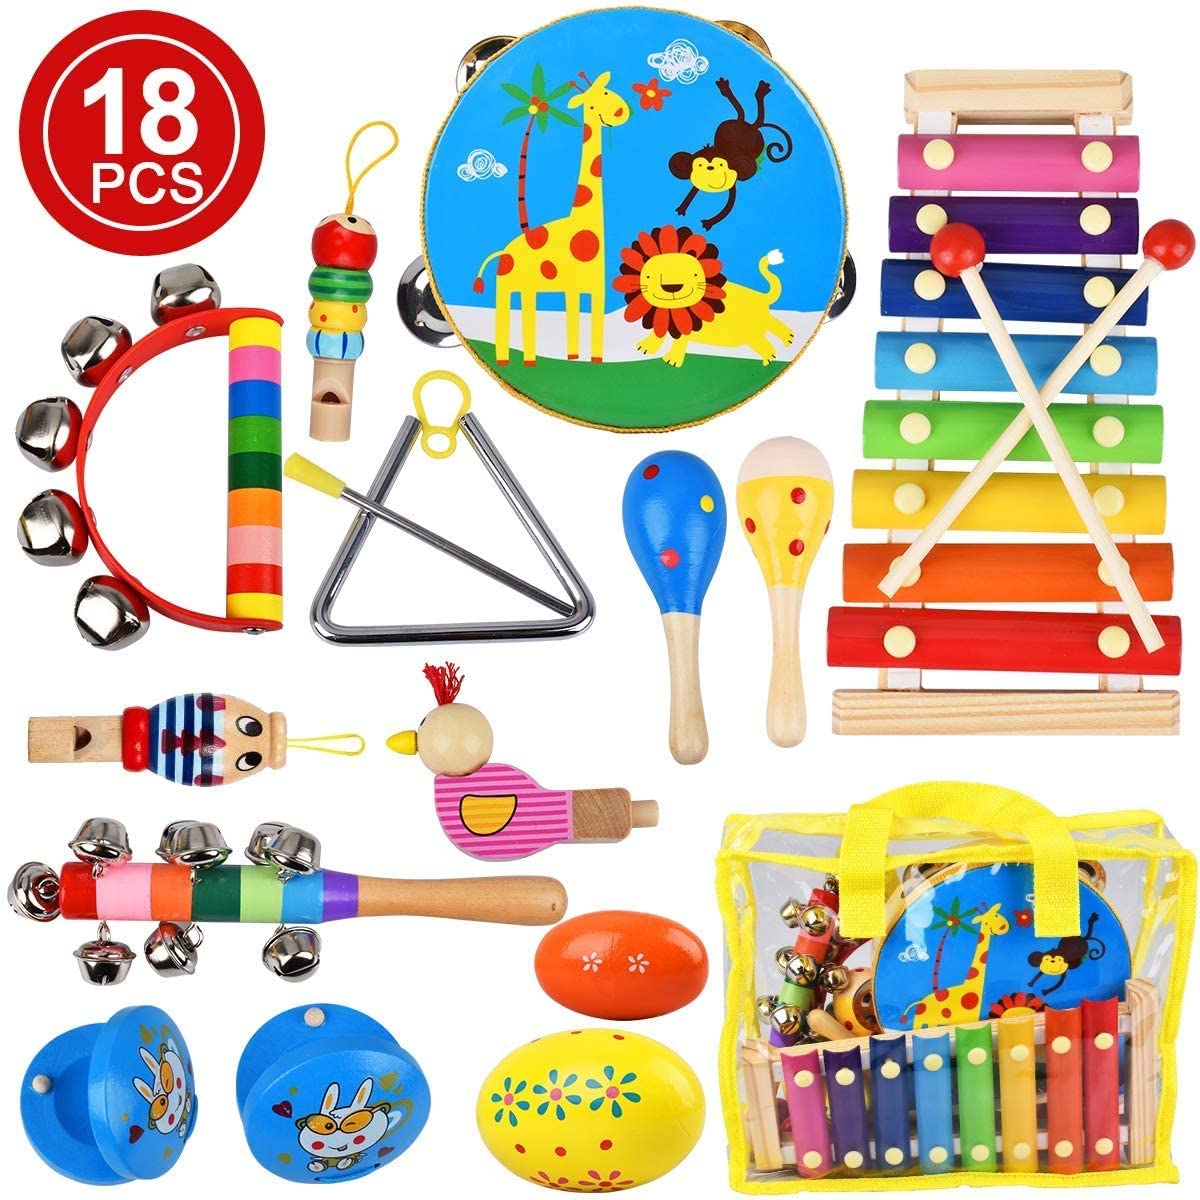 kingdous Kids Musical Instruments Sets Toys, Baby Musical Toys Percussion Instruments, Preschool Educational Early Learning Wooden Toys with Storage Bag for Kids Baby Babies Children Boys and - Home Decor Gifts and More